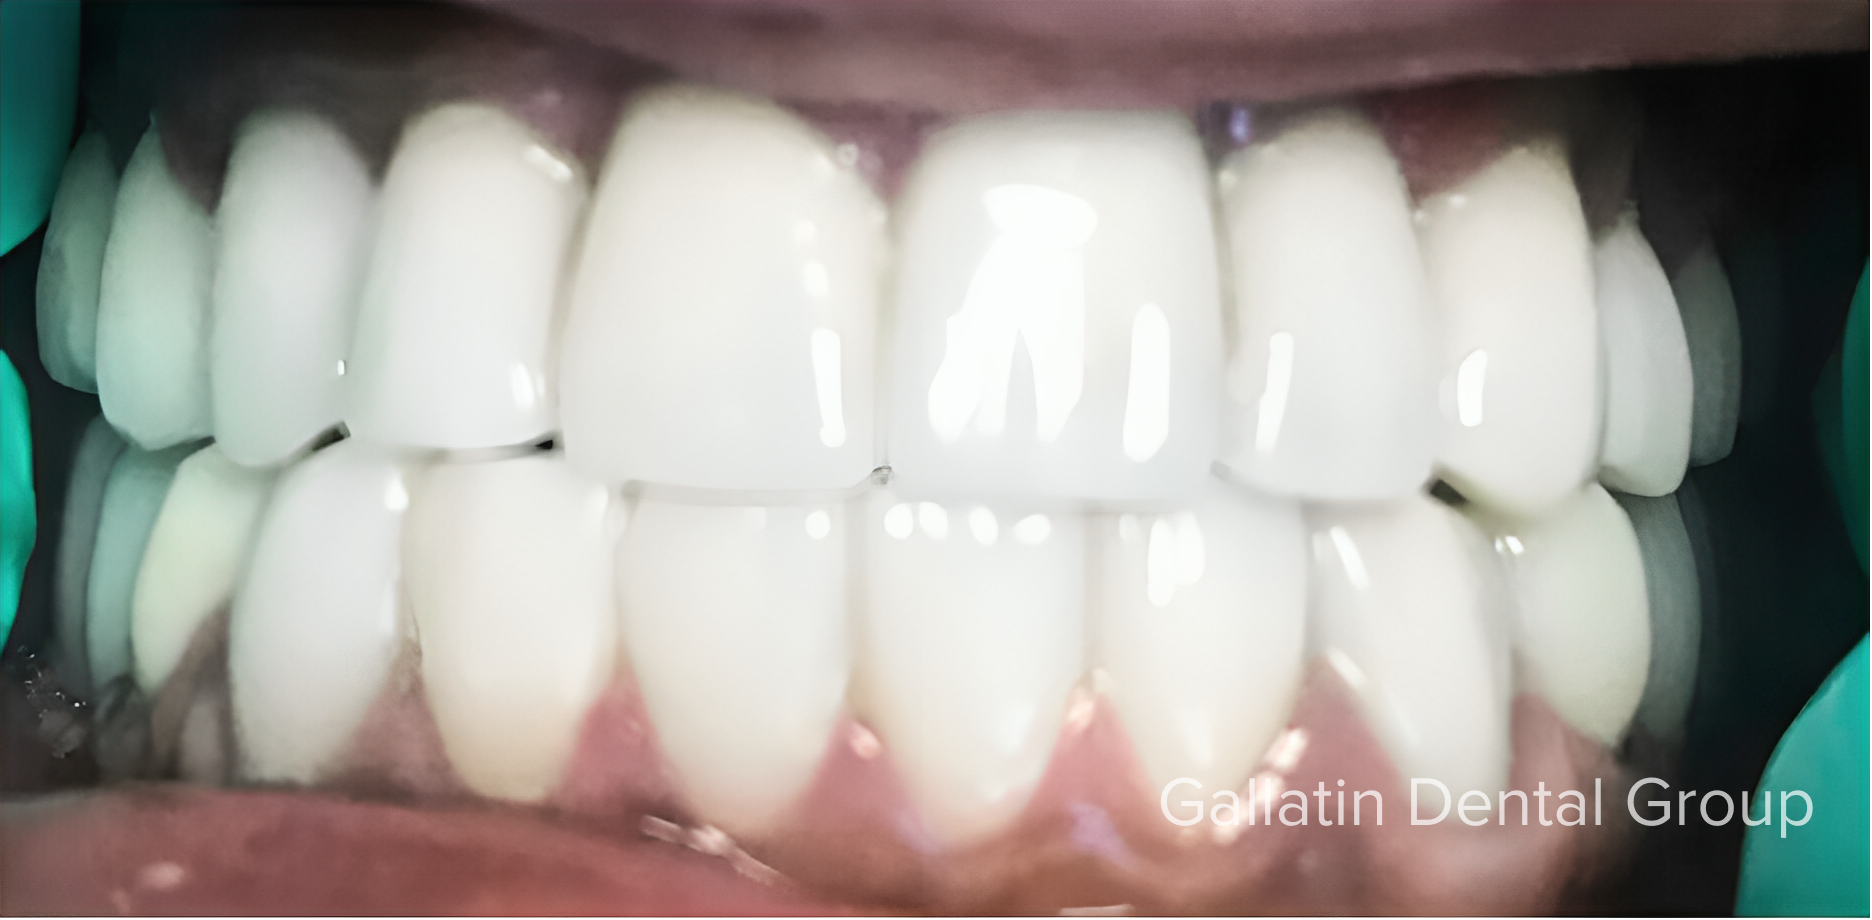 A close up of a person 's teeth with the words gelatin dental group on the bottom